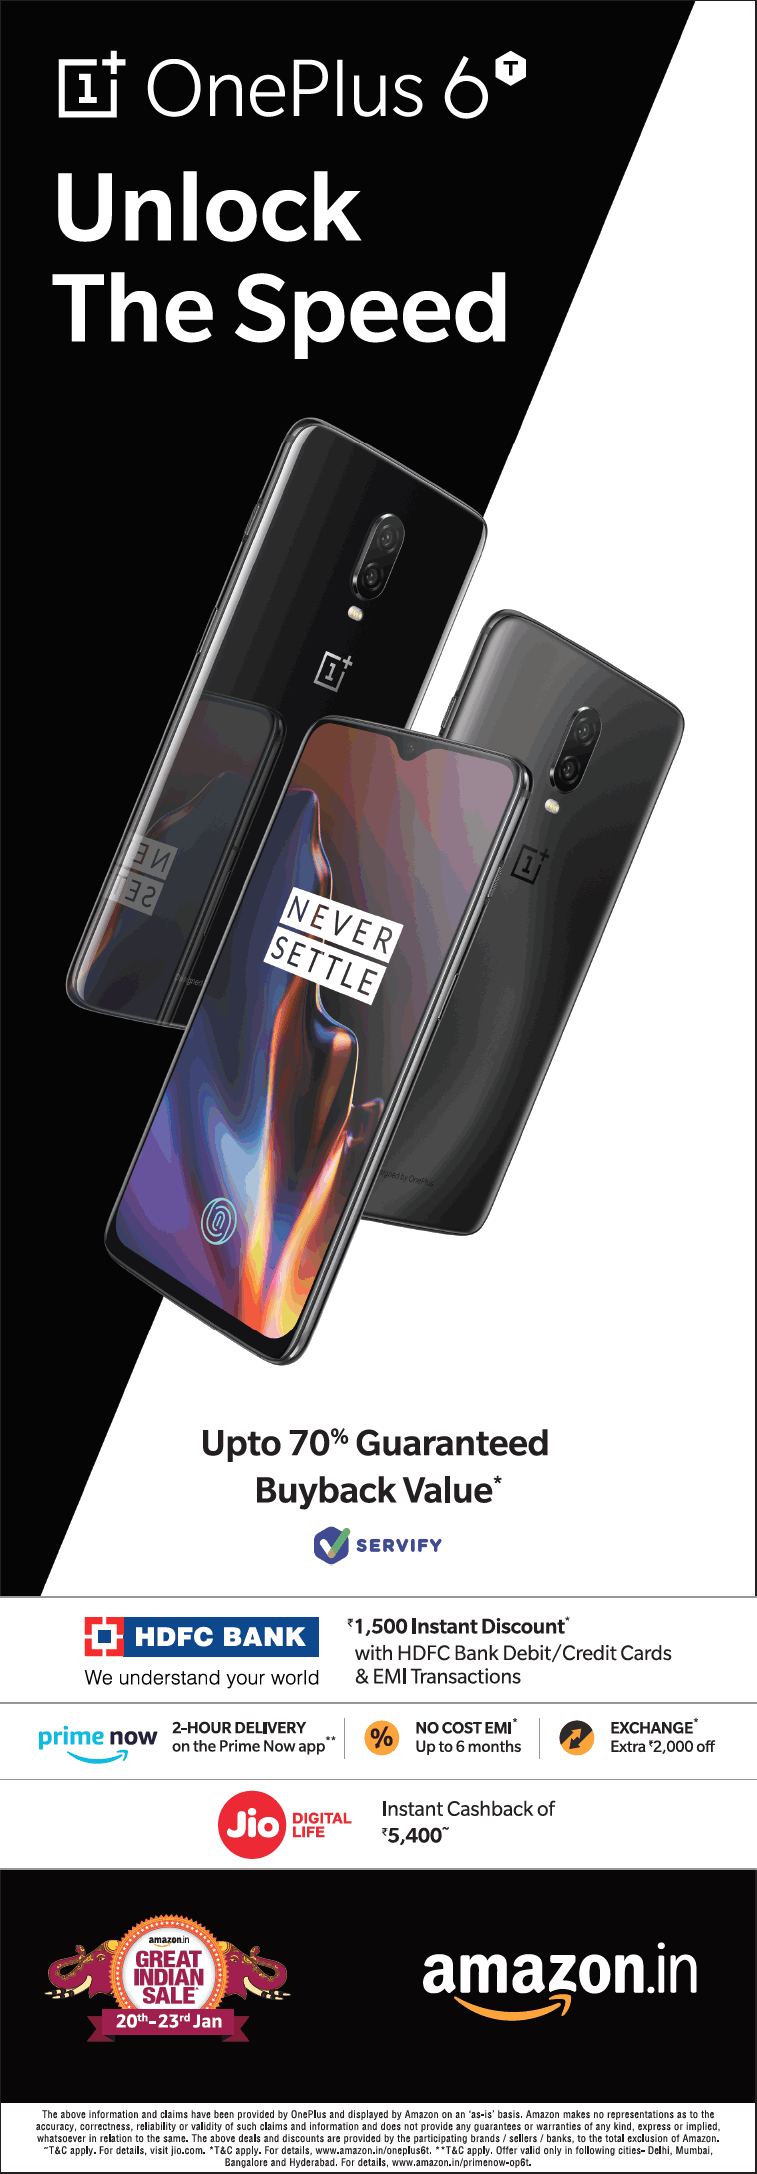 amazon-in-oneplus-6-unlock-the-speed-ad-times-of-india-delhi-23-01-2019.png